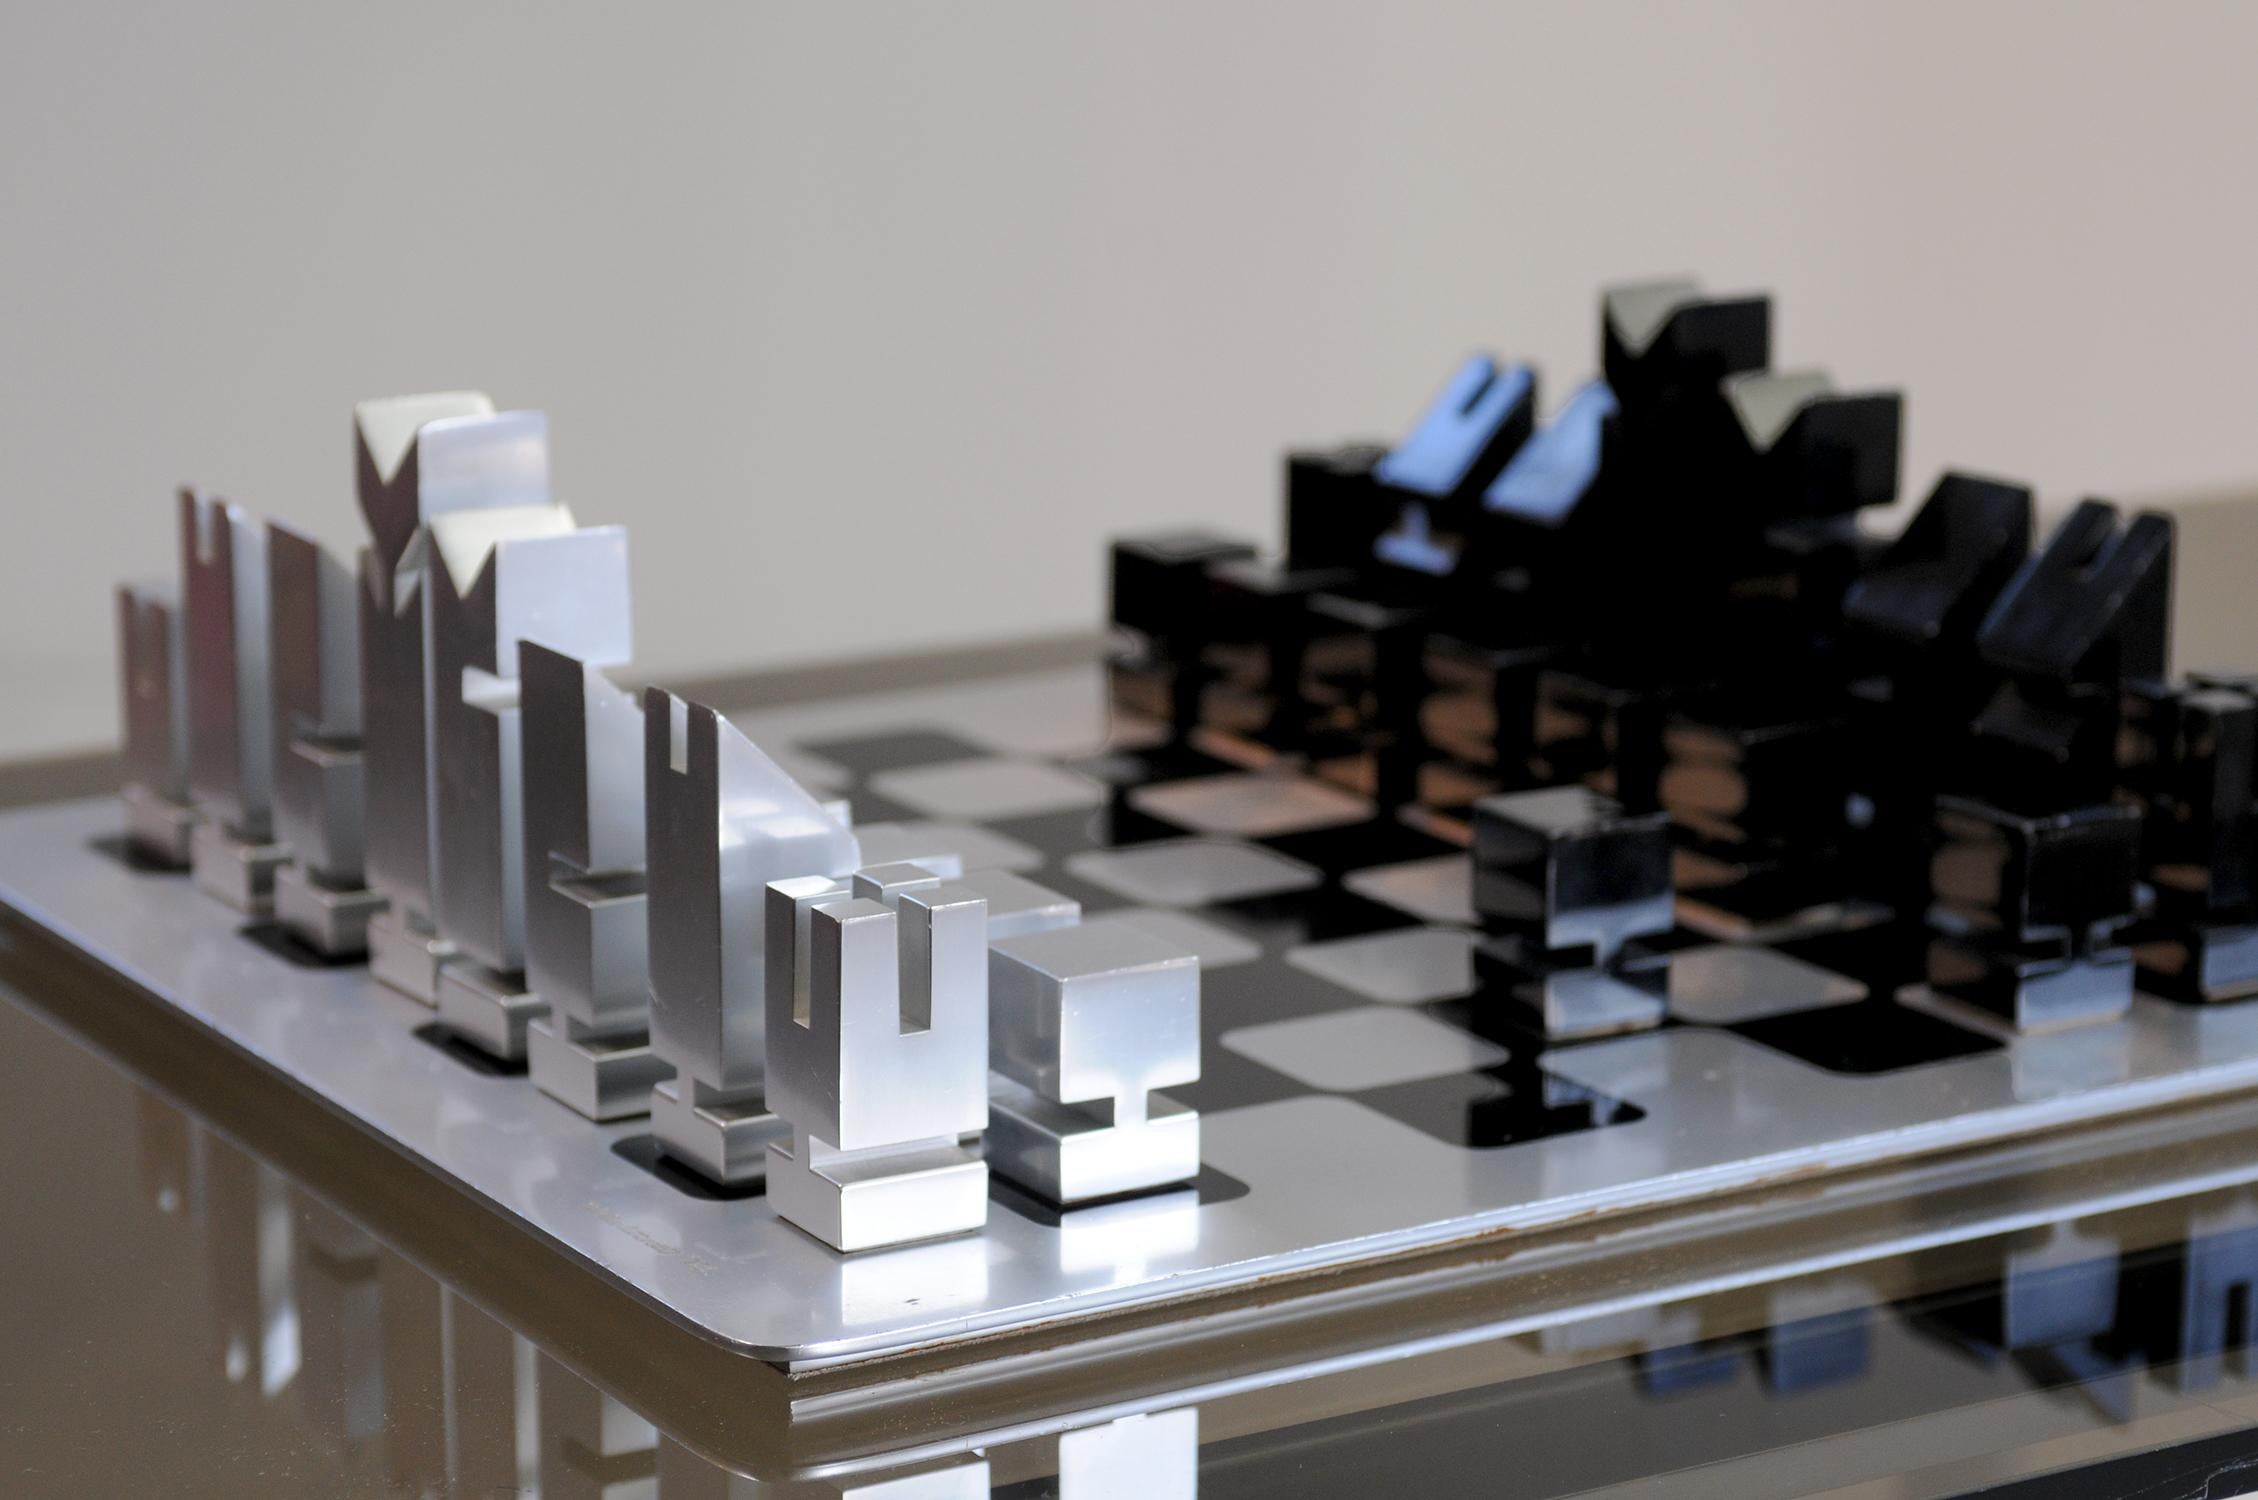 Aluminum Chess Set by Walter and Moretti, No. 1 of Pre-Production, France, 1970